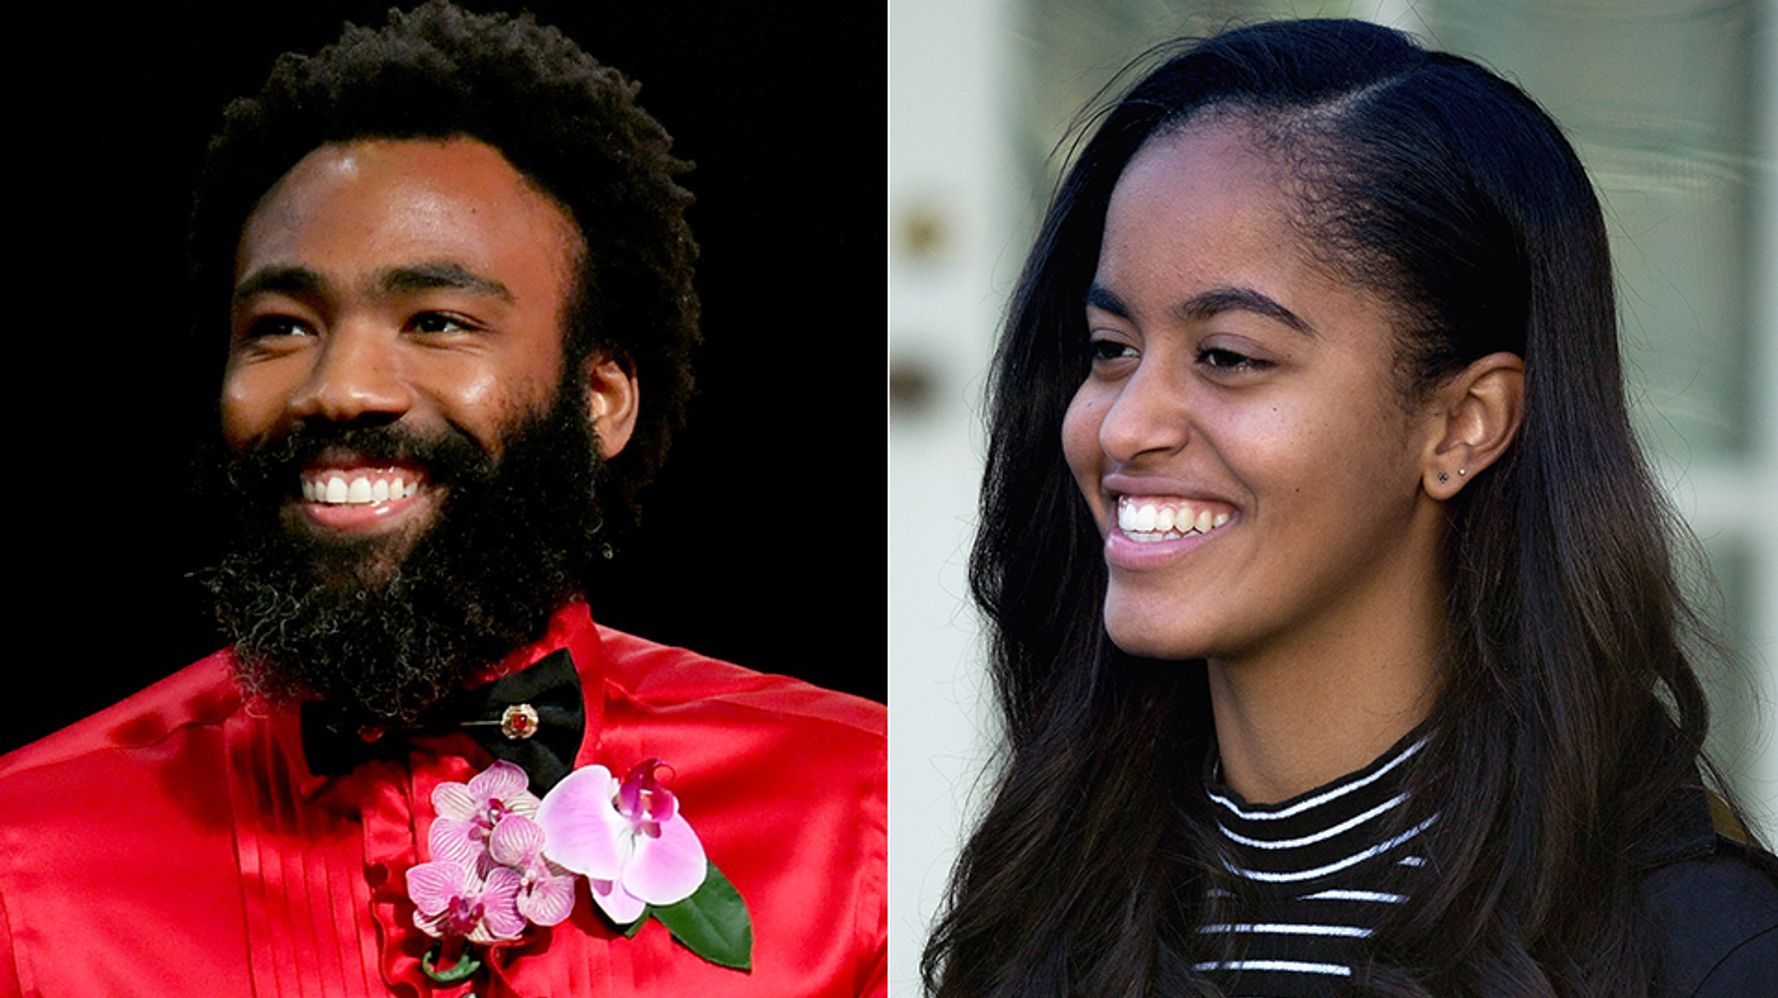 Malia Obama will join the writing team for the new Donald Glover program